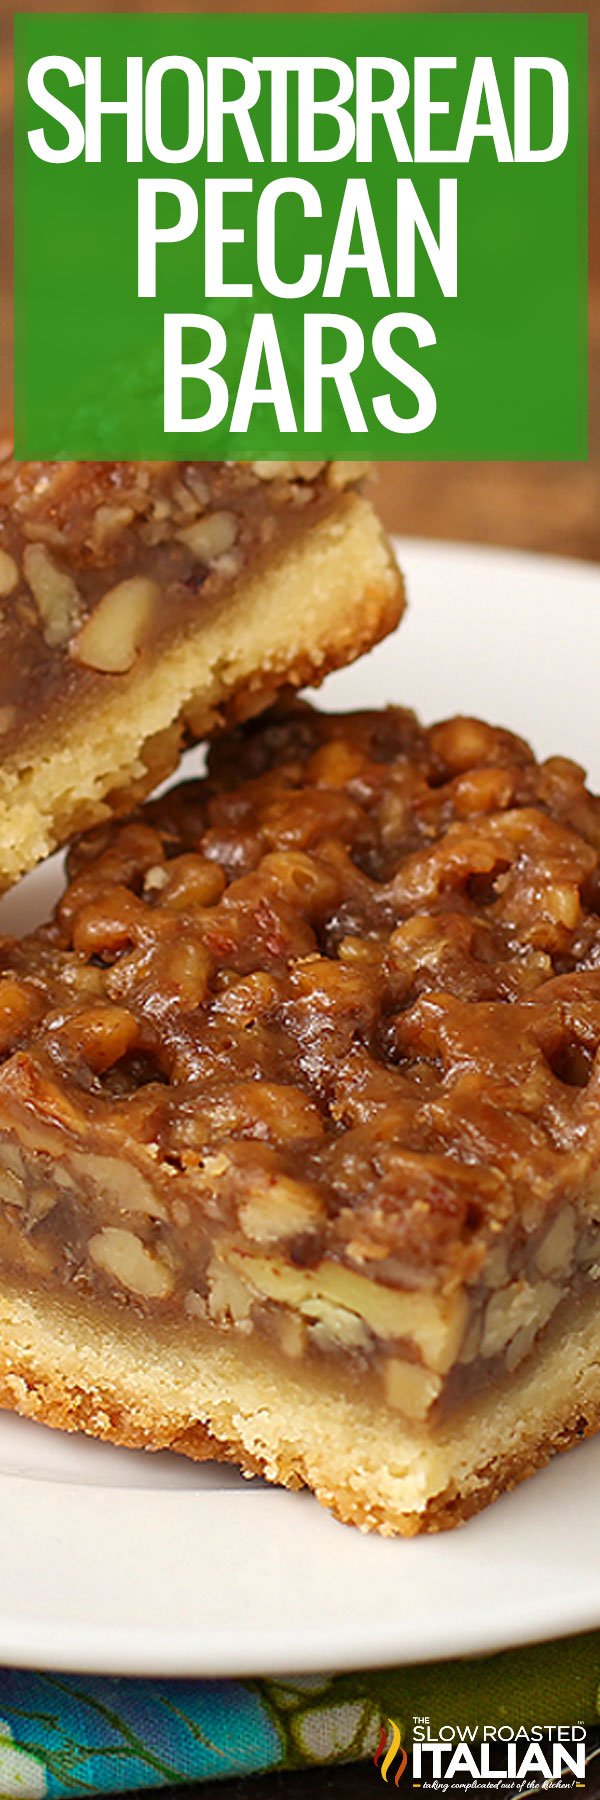 titled image (and shown): pecan pie bars